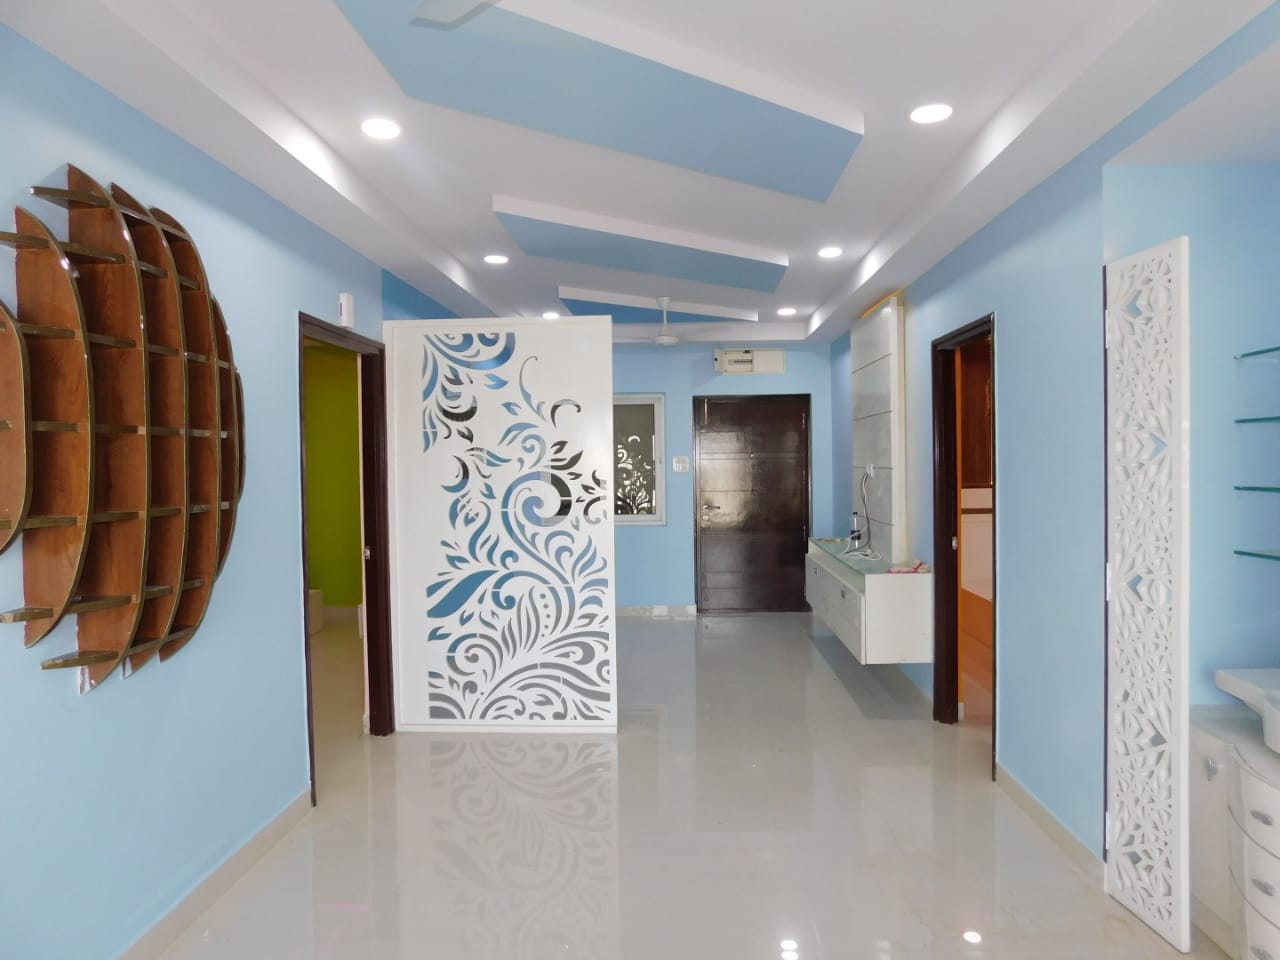 CHEAP AND BEST INTERIORS IN HYDERABAD, | R7 INTERIORS | CHEAP AND BEST INTERIORS IN HYDERABAD, CHEAP AND BEST INTERIORS IN SUNCITY, CHEAP AND BEST INTERIORS IN UPPAL,CHEAP AND BEST INTERIORS IN L B NAGAR, CHEAP AND BEST INTERIORS IN MEHDIPATNAM,  - GL40668